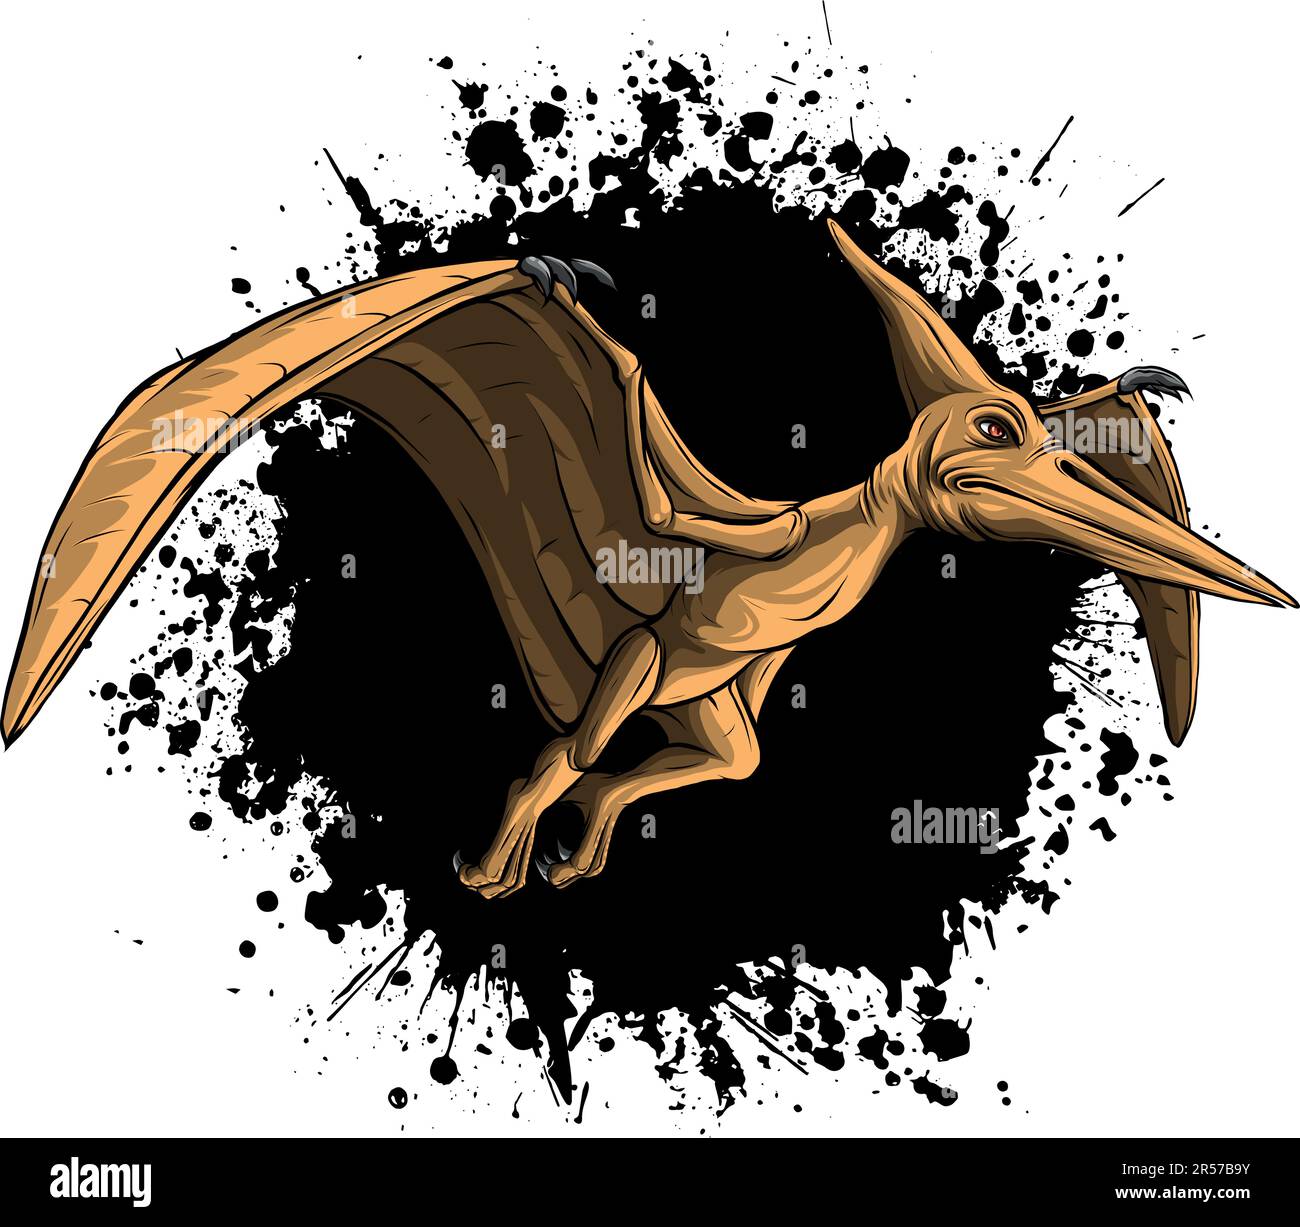 Pteranodon Reptile Side Profile Lizard, Pterosaur, Lizard, Prehistoric PNG  Transparent Image and Clipart for Free Download